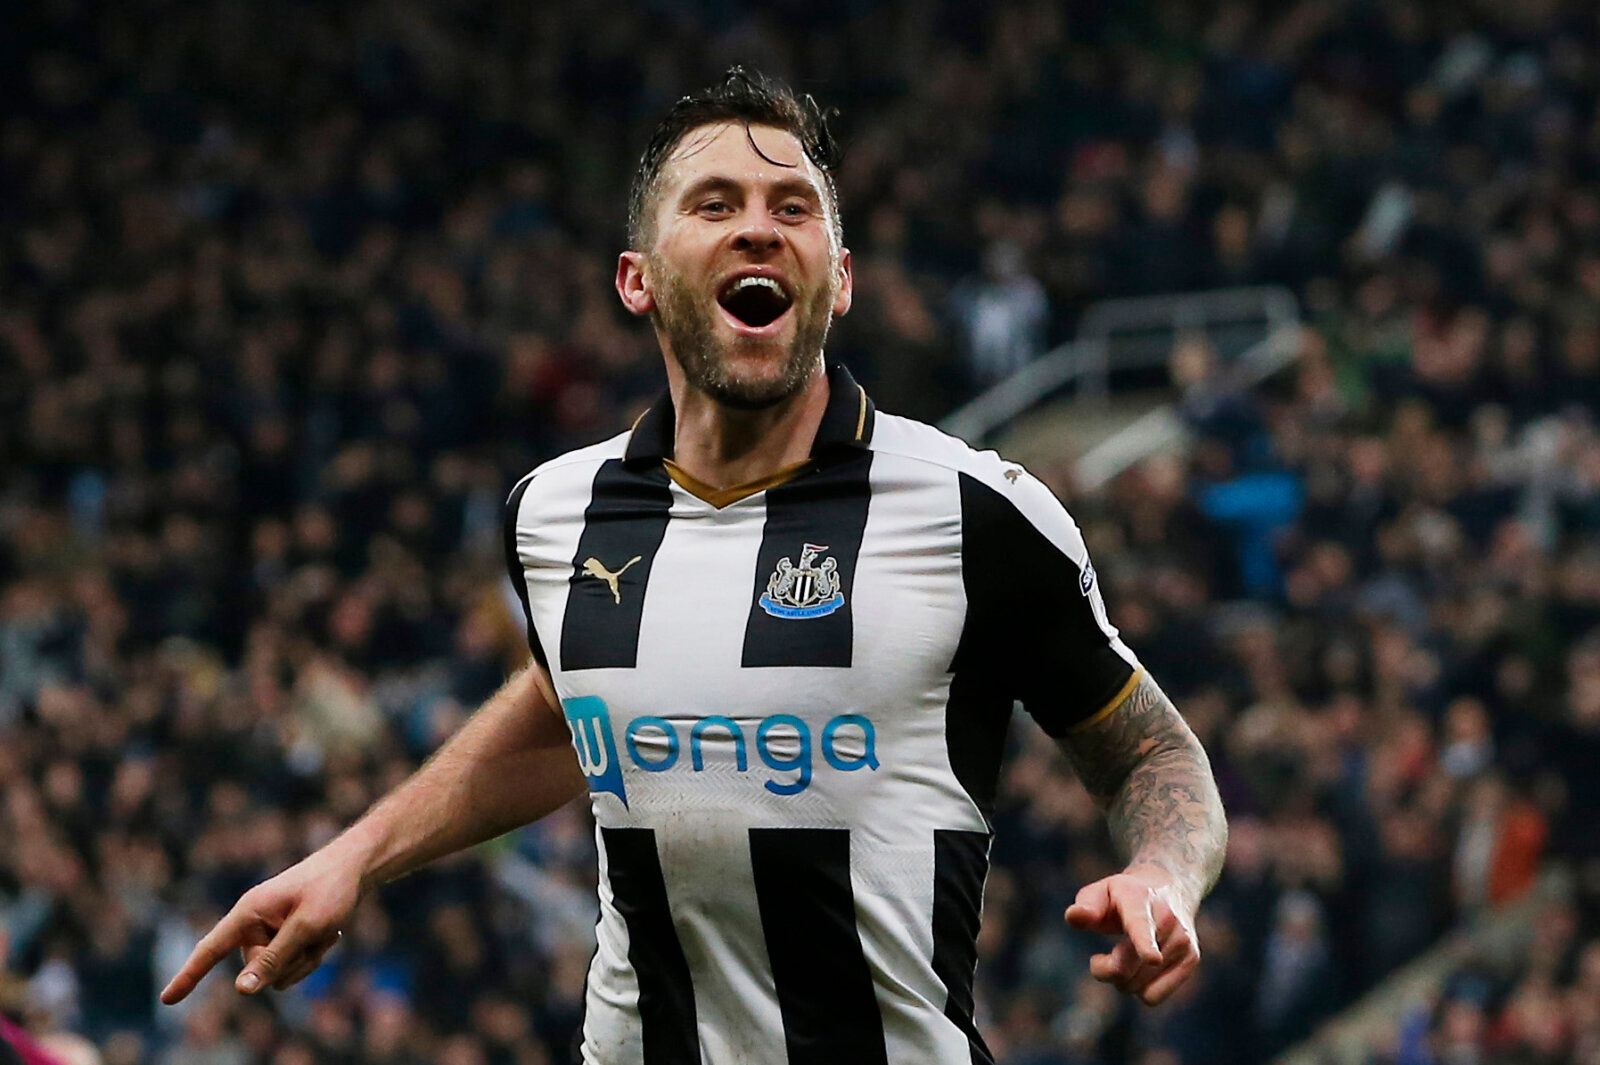 Britain Soccer Football - Newcastle United v Rotherham United - Sky Bet Championship - St James' Park - 21/1/17 Newcastle United's Daryl Murphy celebrates scoring their first goal  Mandatory Credit: Action Images / Craig Brough Livepic EDITORIAL USE ONLY. No use with unauthorized audio, video, data, fixture lists, club/league logos or 